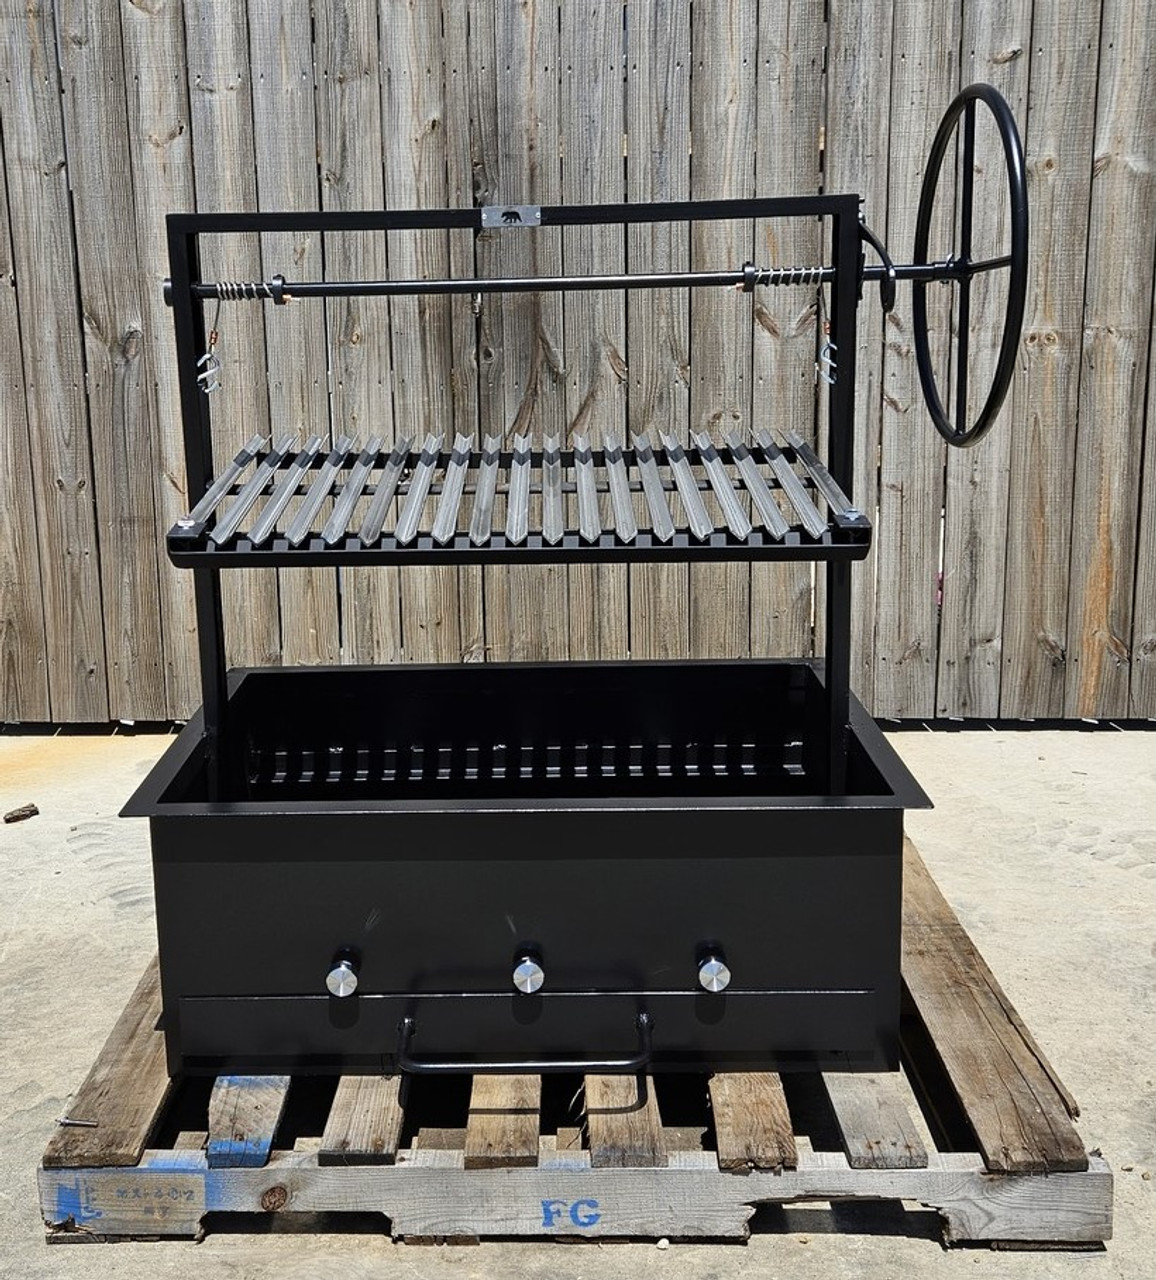 Santa Maria BBQ Grill Pit Includes a Cart With Four Casters Free Shipping 